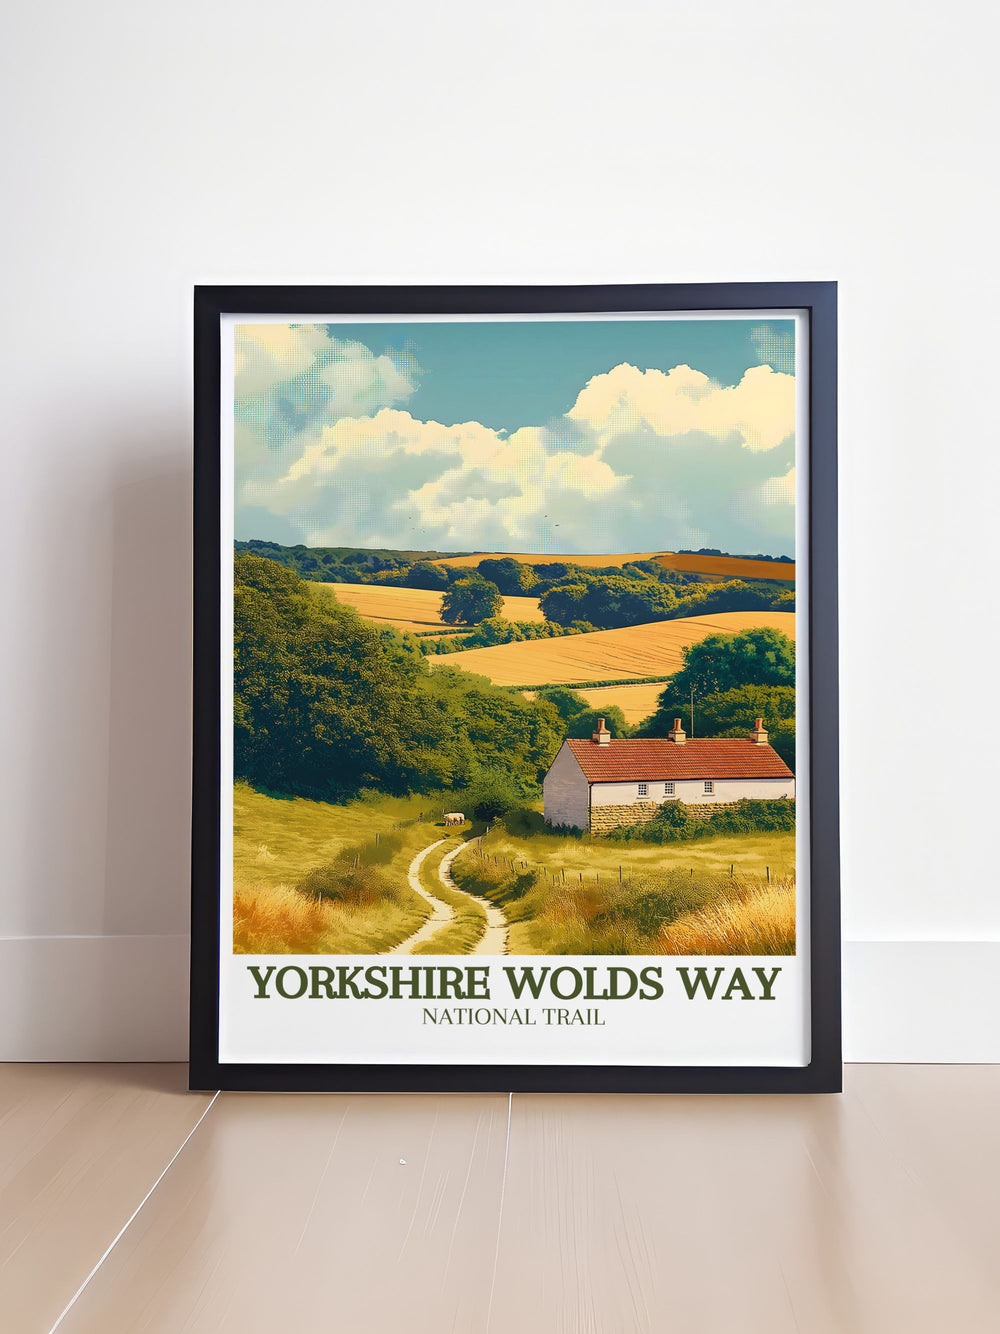 Celebrate the natural beauty of the Yorkshire Wolds Way with this vintage poster. The artwork features the trails diverse landscapes, from chalky hills to lush green valleys, evoking the timeless appeal of one of the UKs most scenic trails, ideal for any nature lovers art collection.